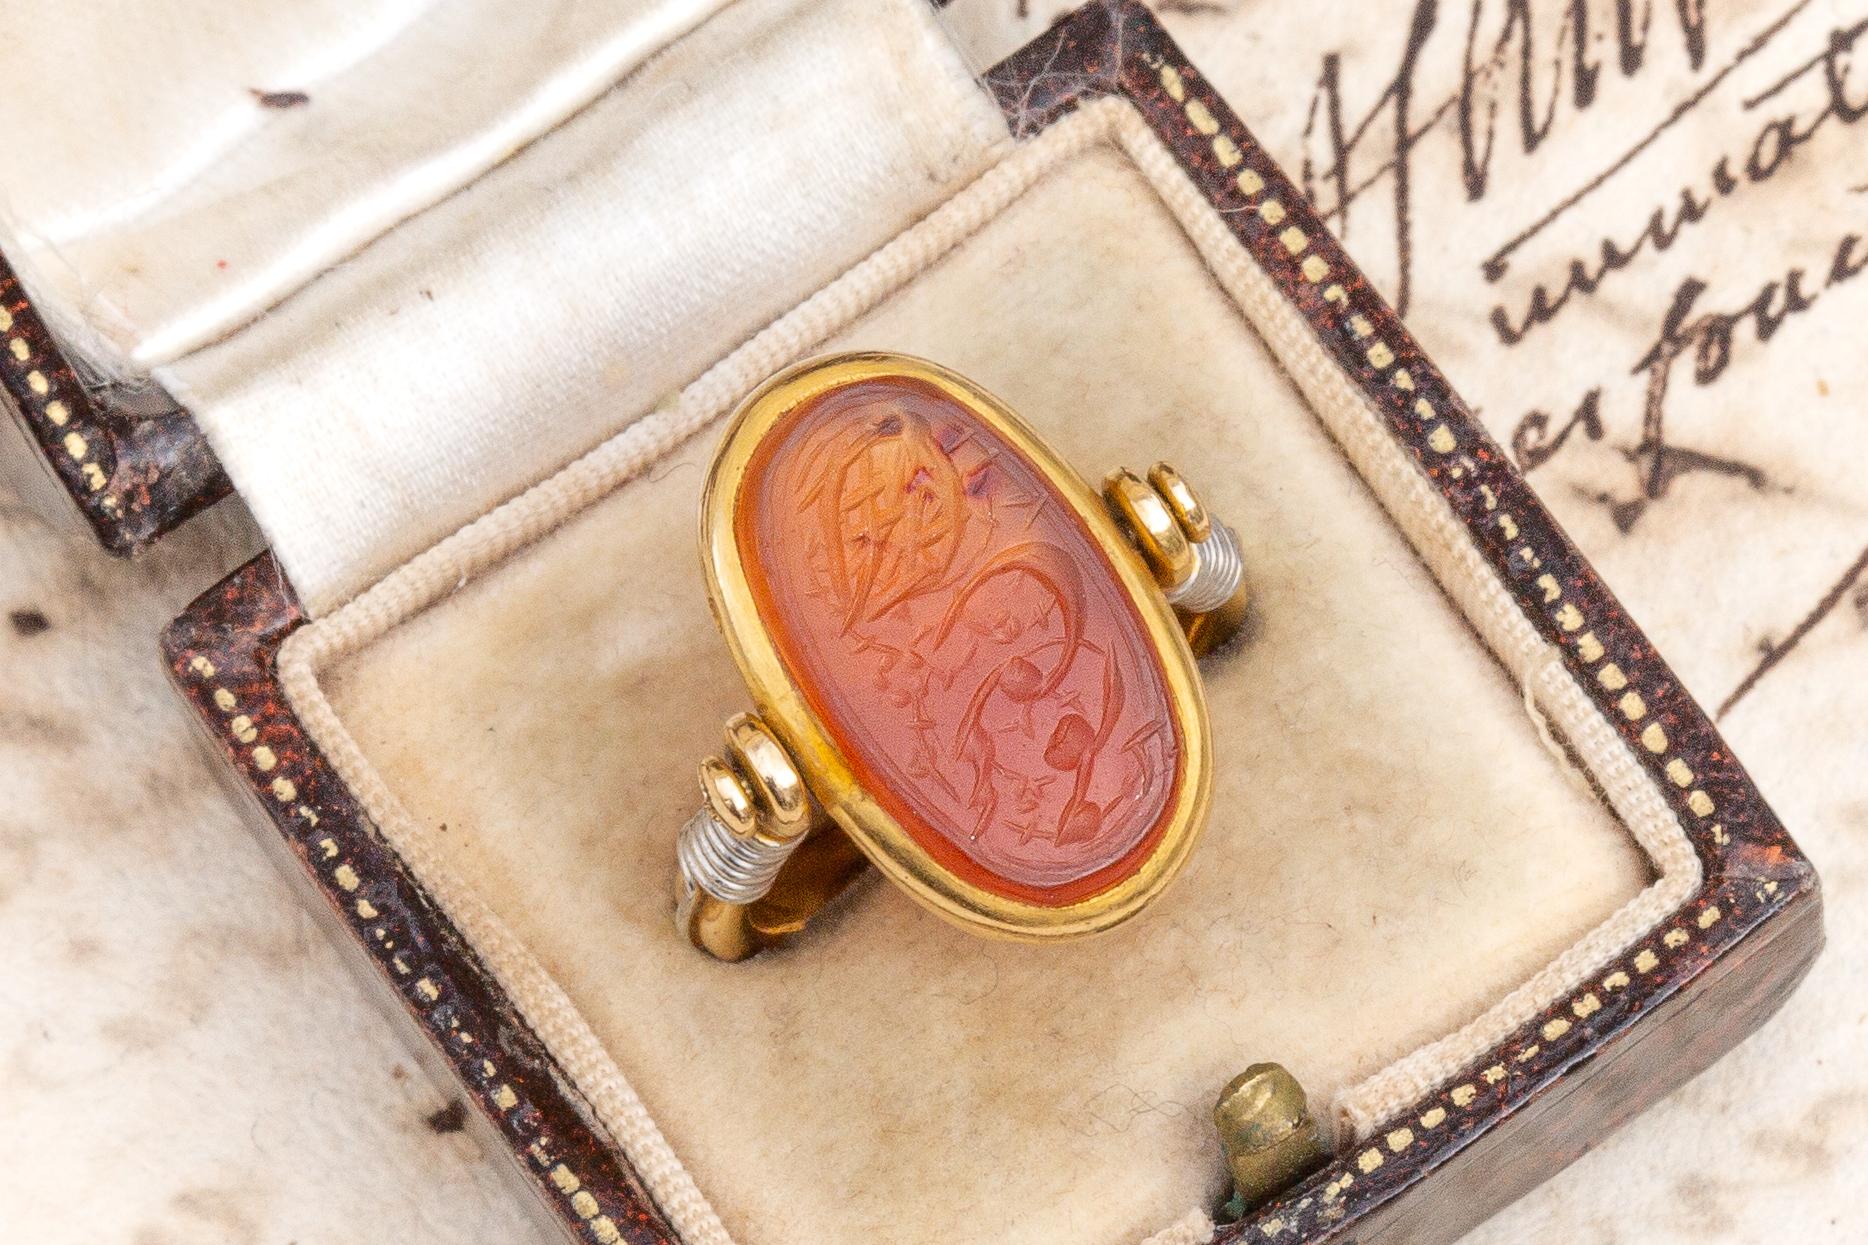 Oval Cut Antique French Gold Swivel Ring with Islamic Orange Agate Calligraphic Intaglio